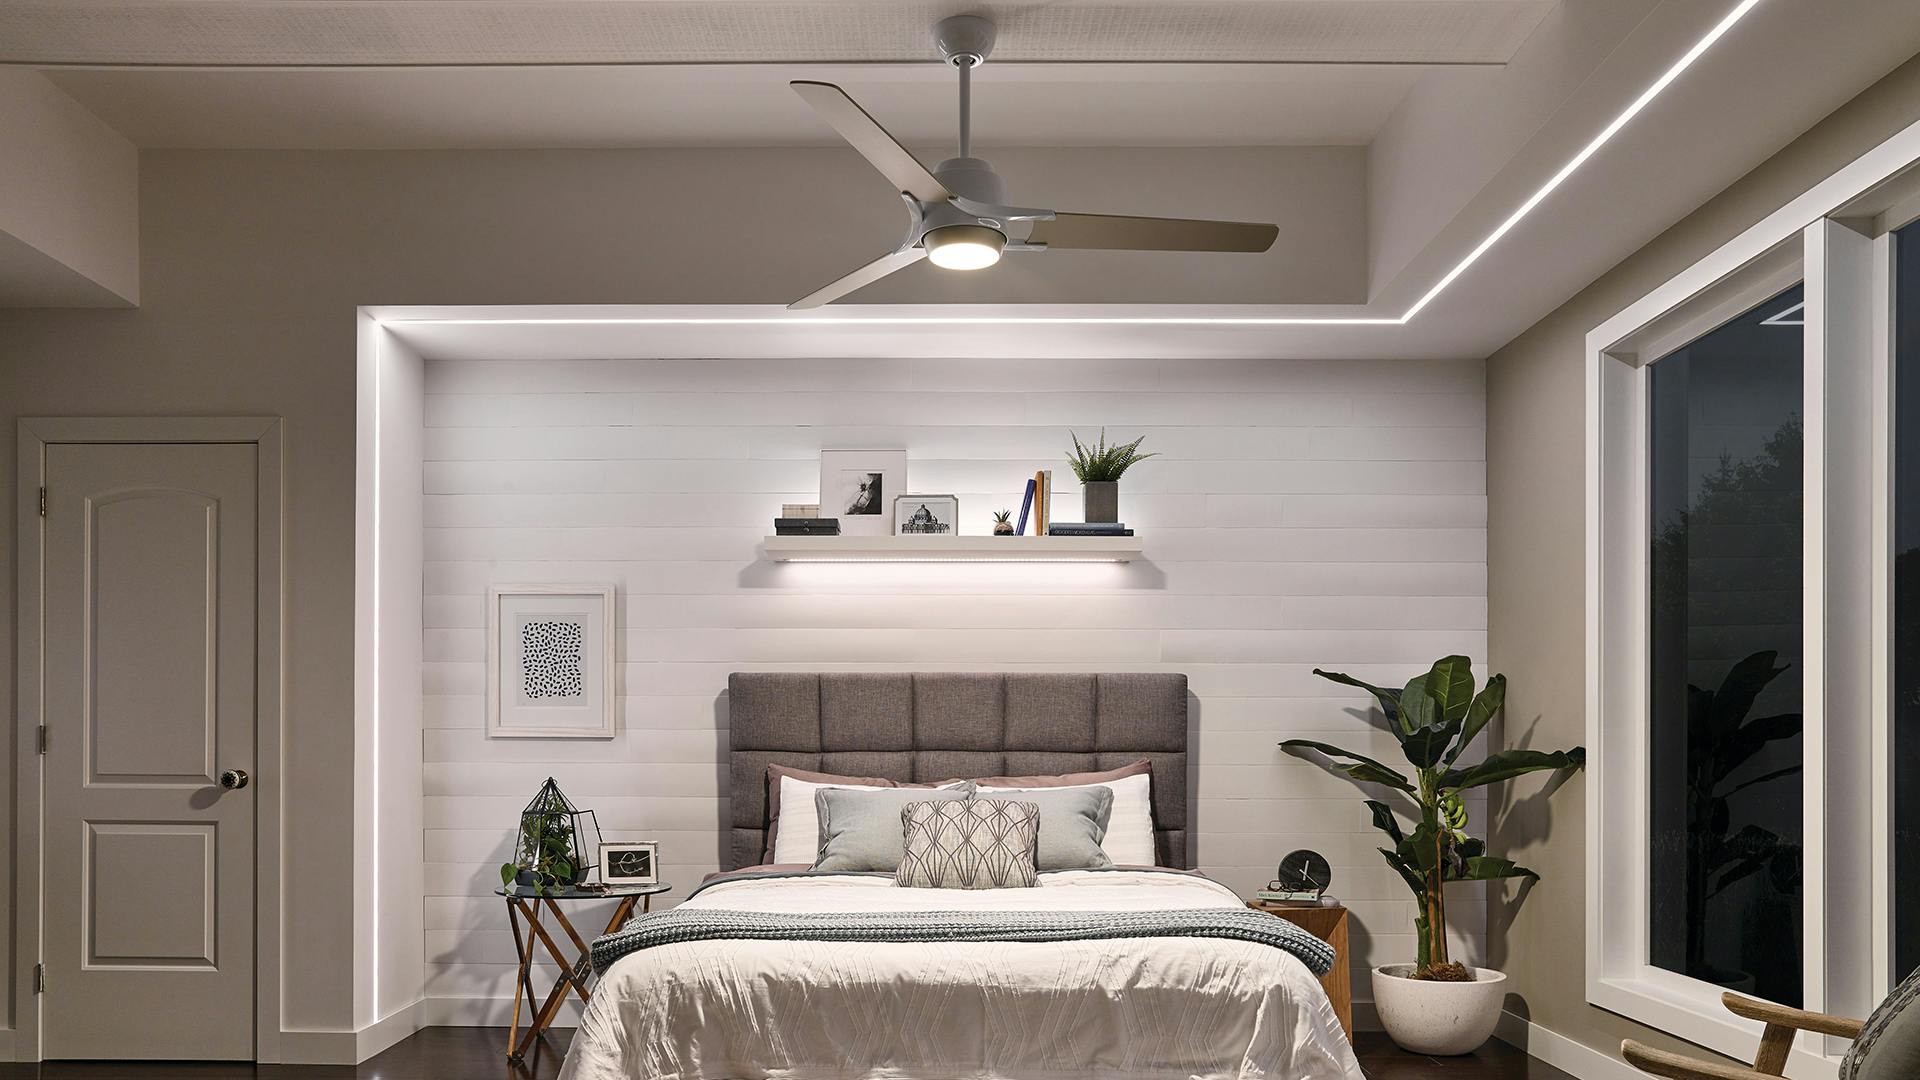 bedroom with Kichler fan and lighting